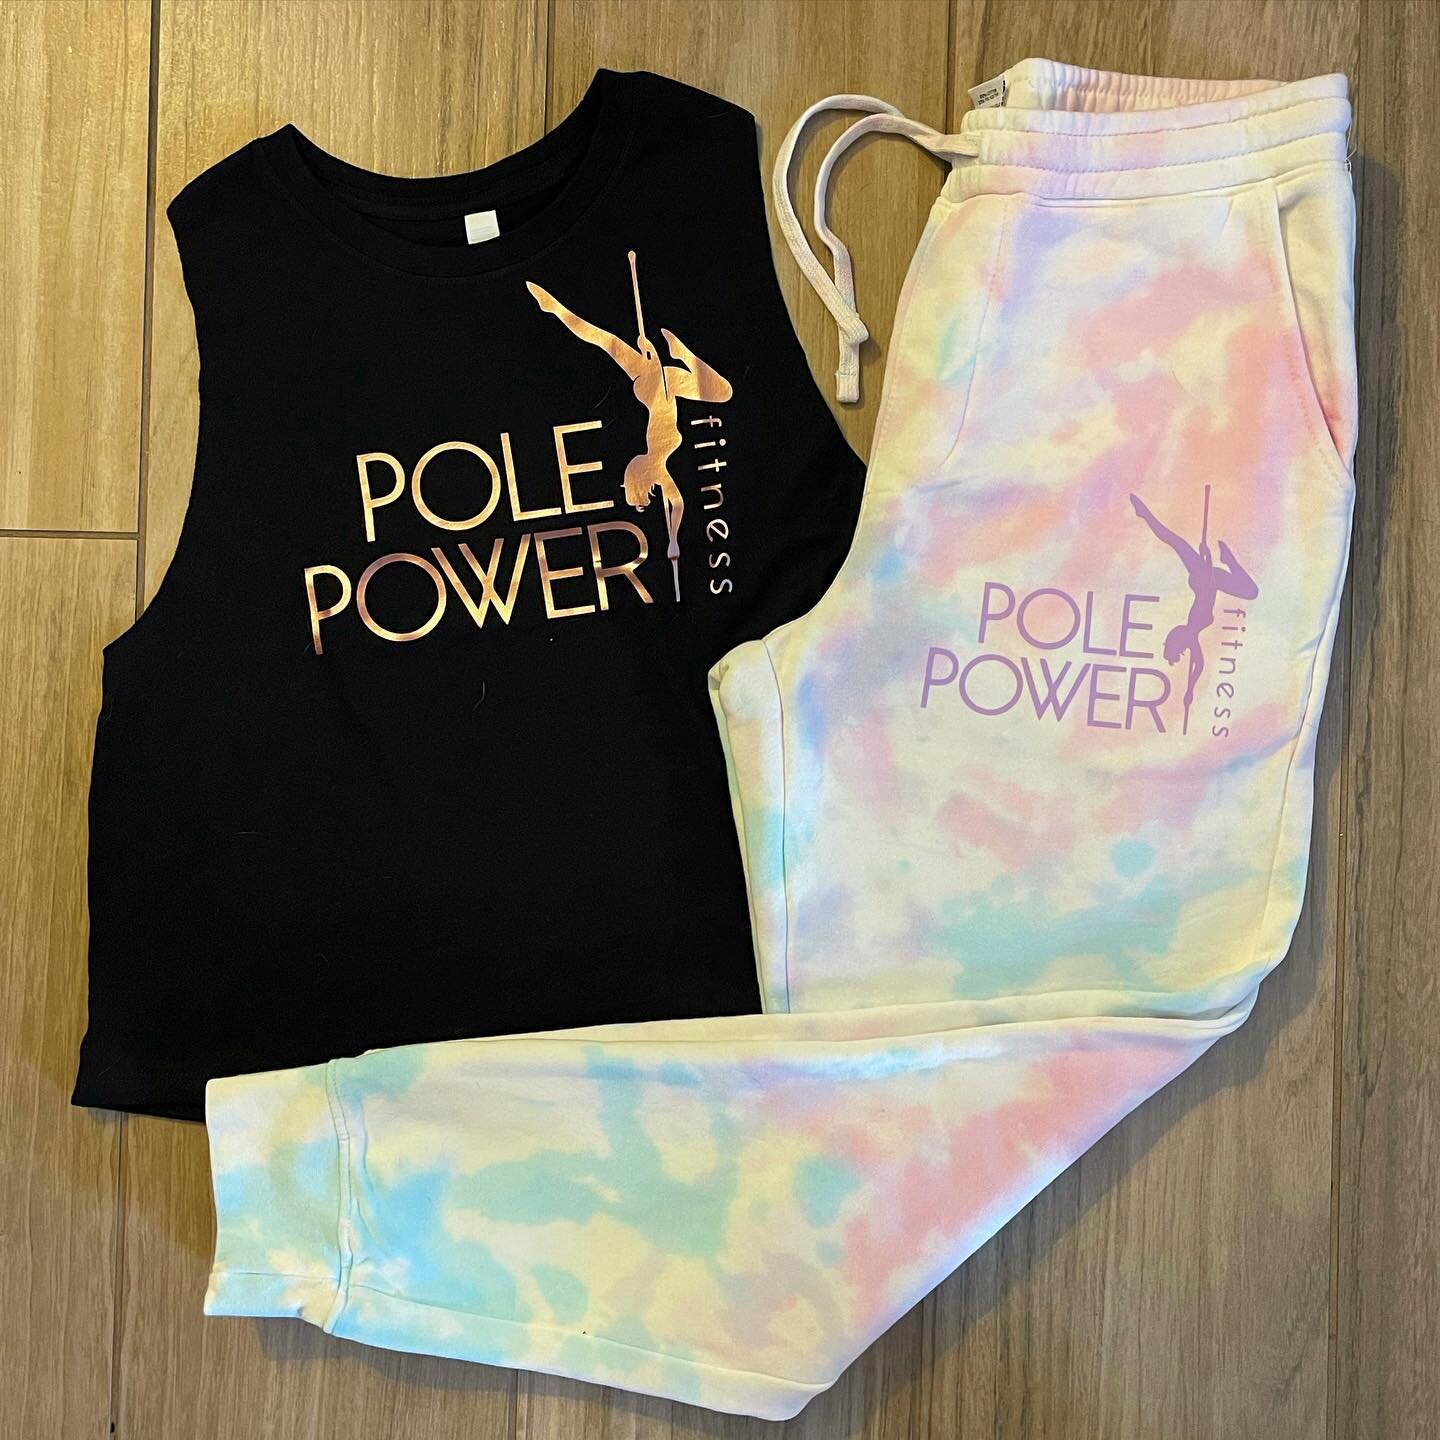 🦄 Who&rsquo;s excited for NEW merch?! 🦄
We&rsquo;ve got lots of new styles and colours to keep you cozy and cute this winter!
-
#polepowerfitness #polepowerfitnessmerch #christmasshopping #treatyoself #cozy #supportlocal #polestudio #represent